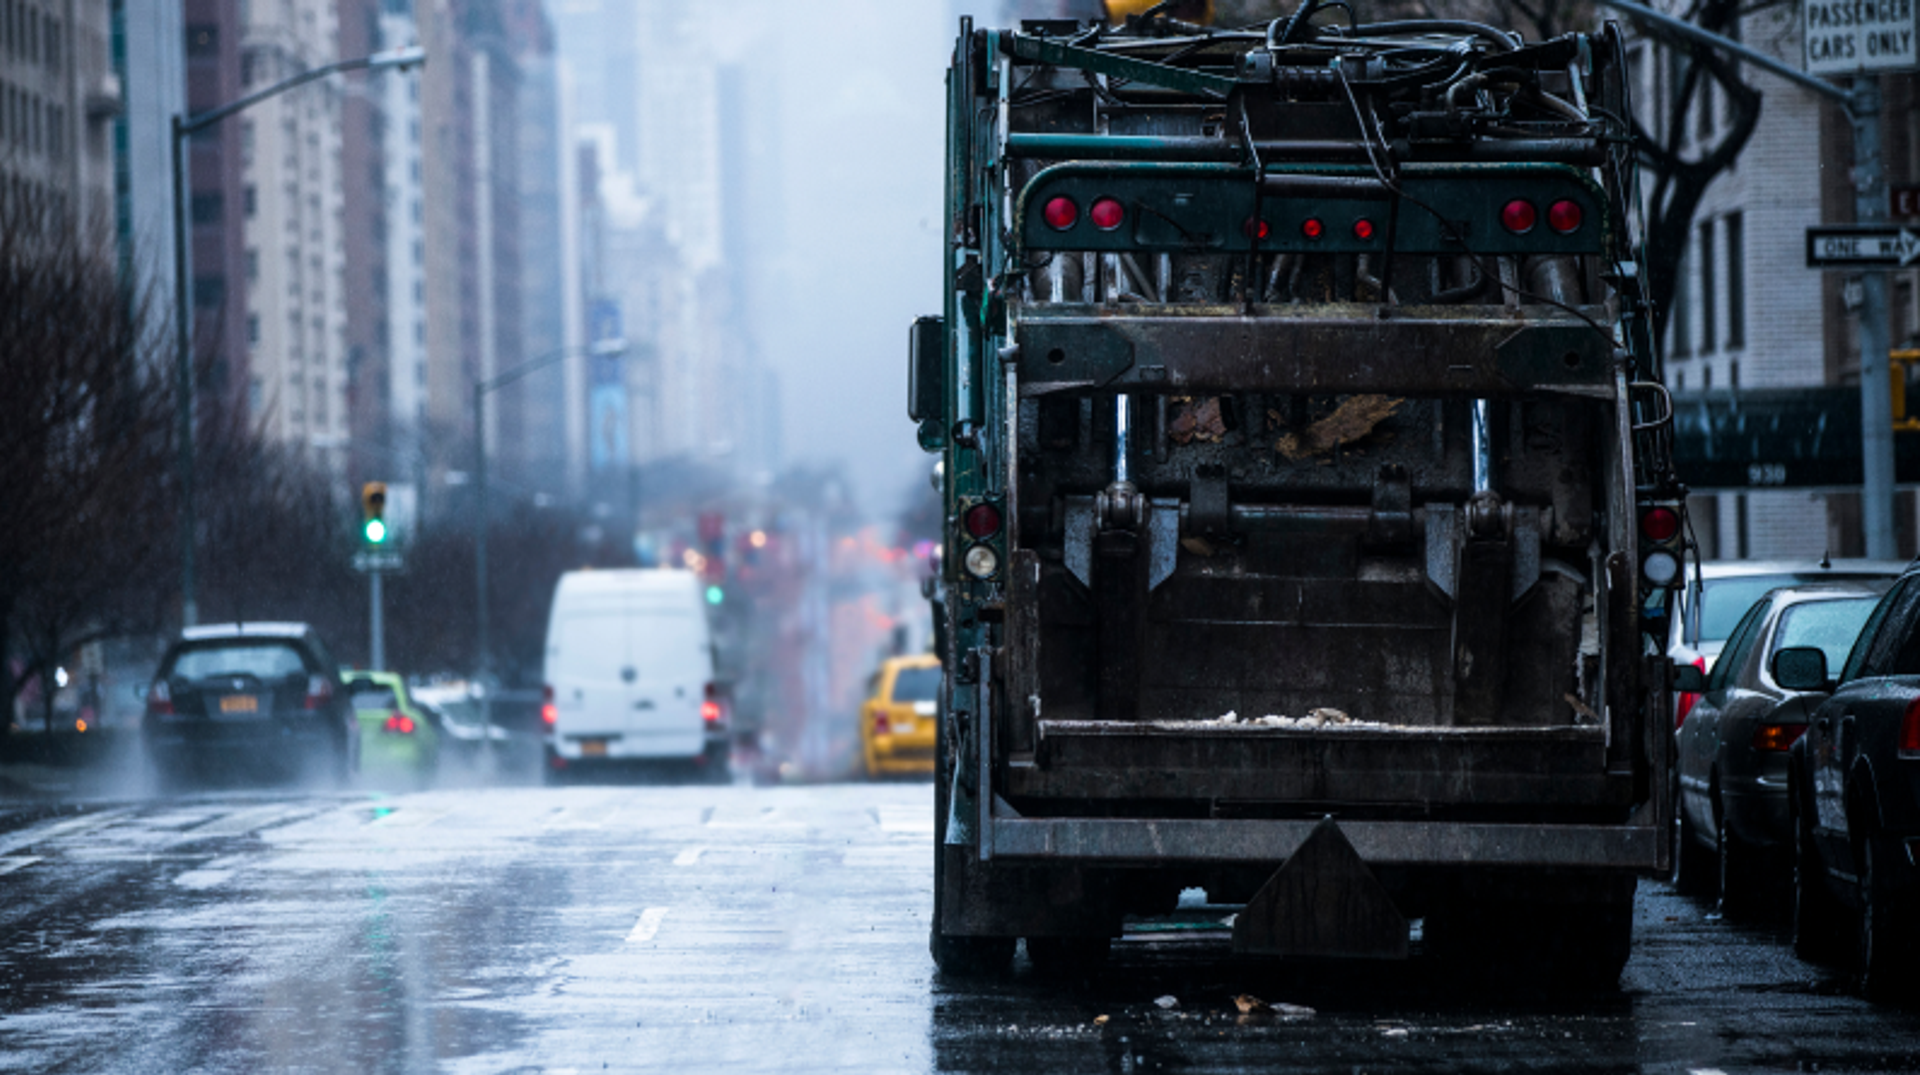 Cyclist riding behind garbage truck in the rain